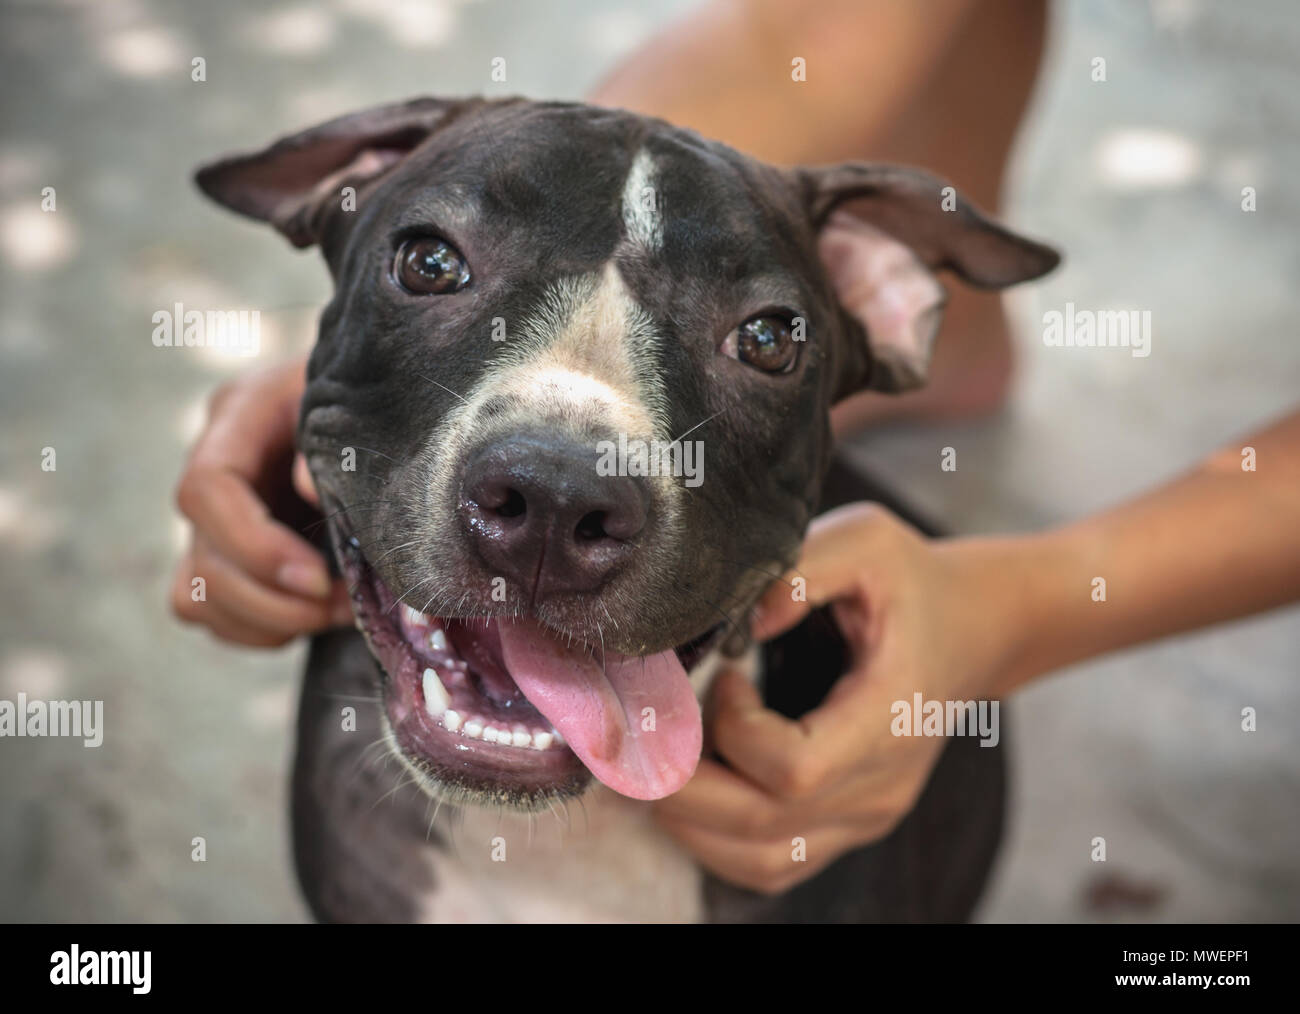 Black Pit bull puppy looking smile funny sitting on concrete background Stock Photo